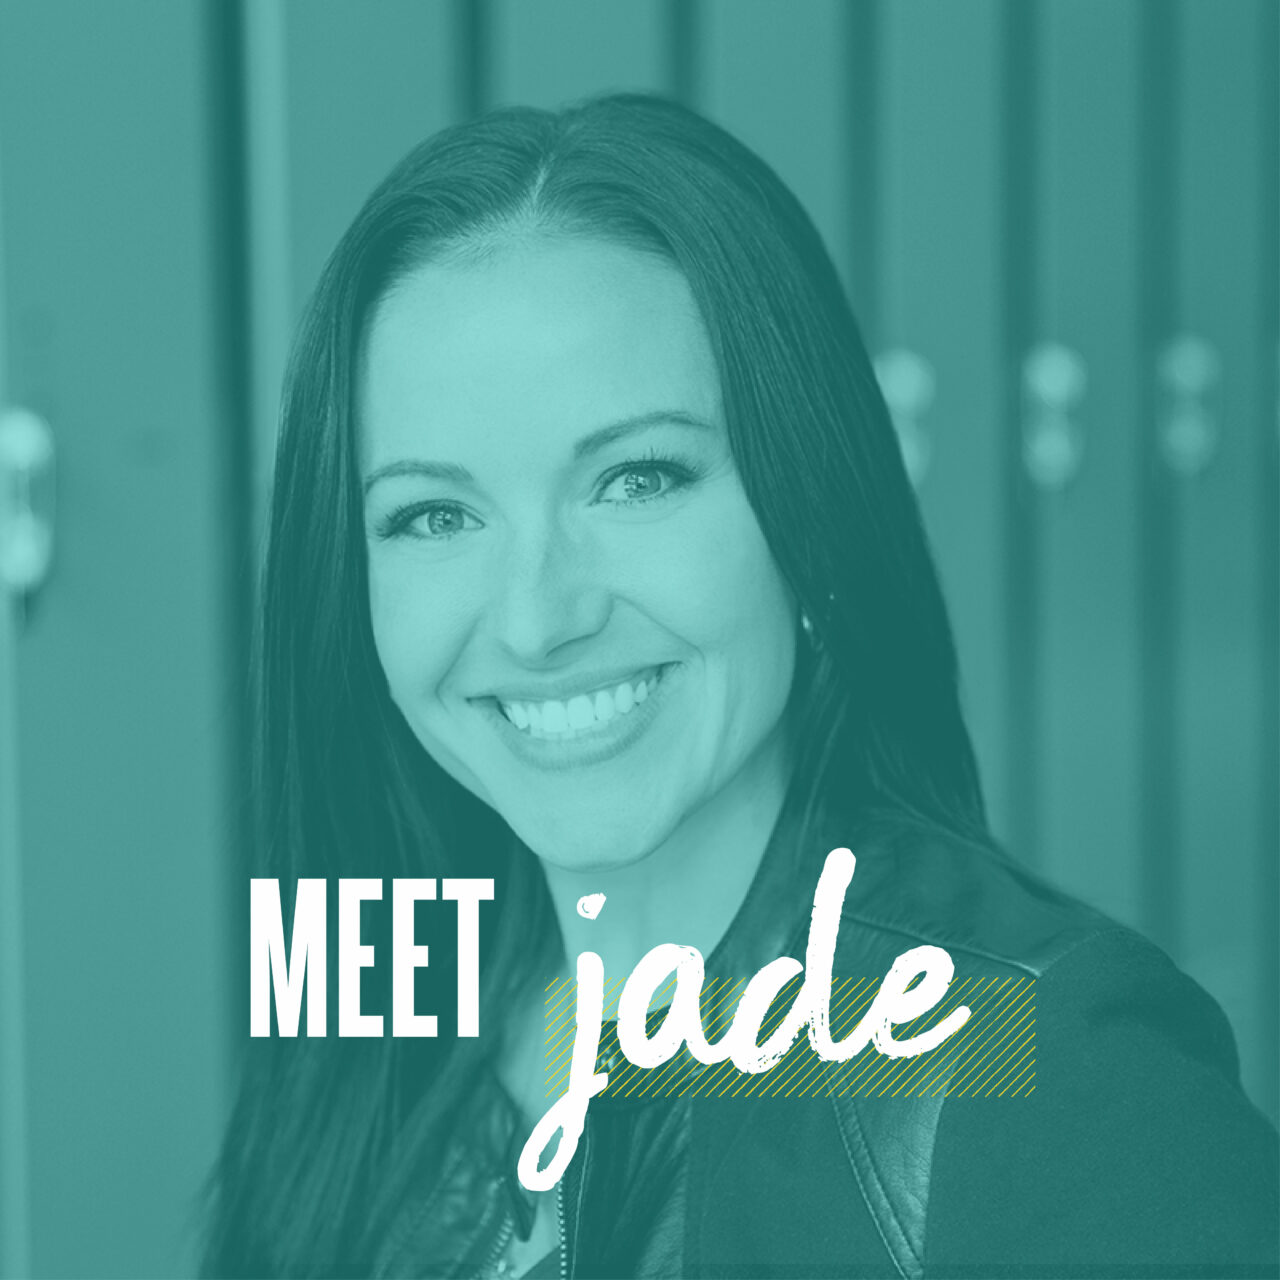 Introducing Jade, Lemonly's Business Development Manager